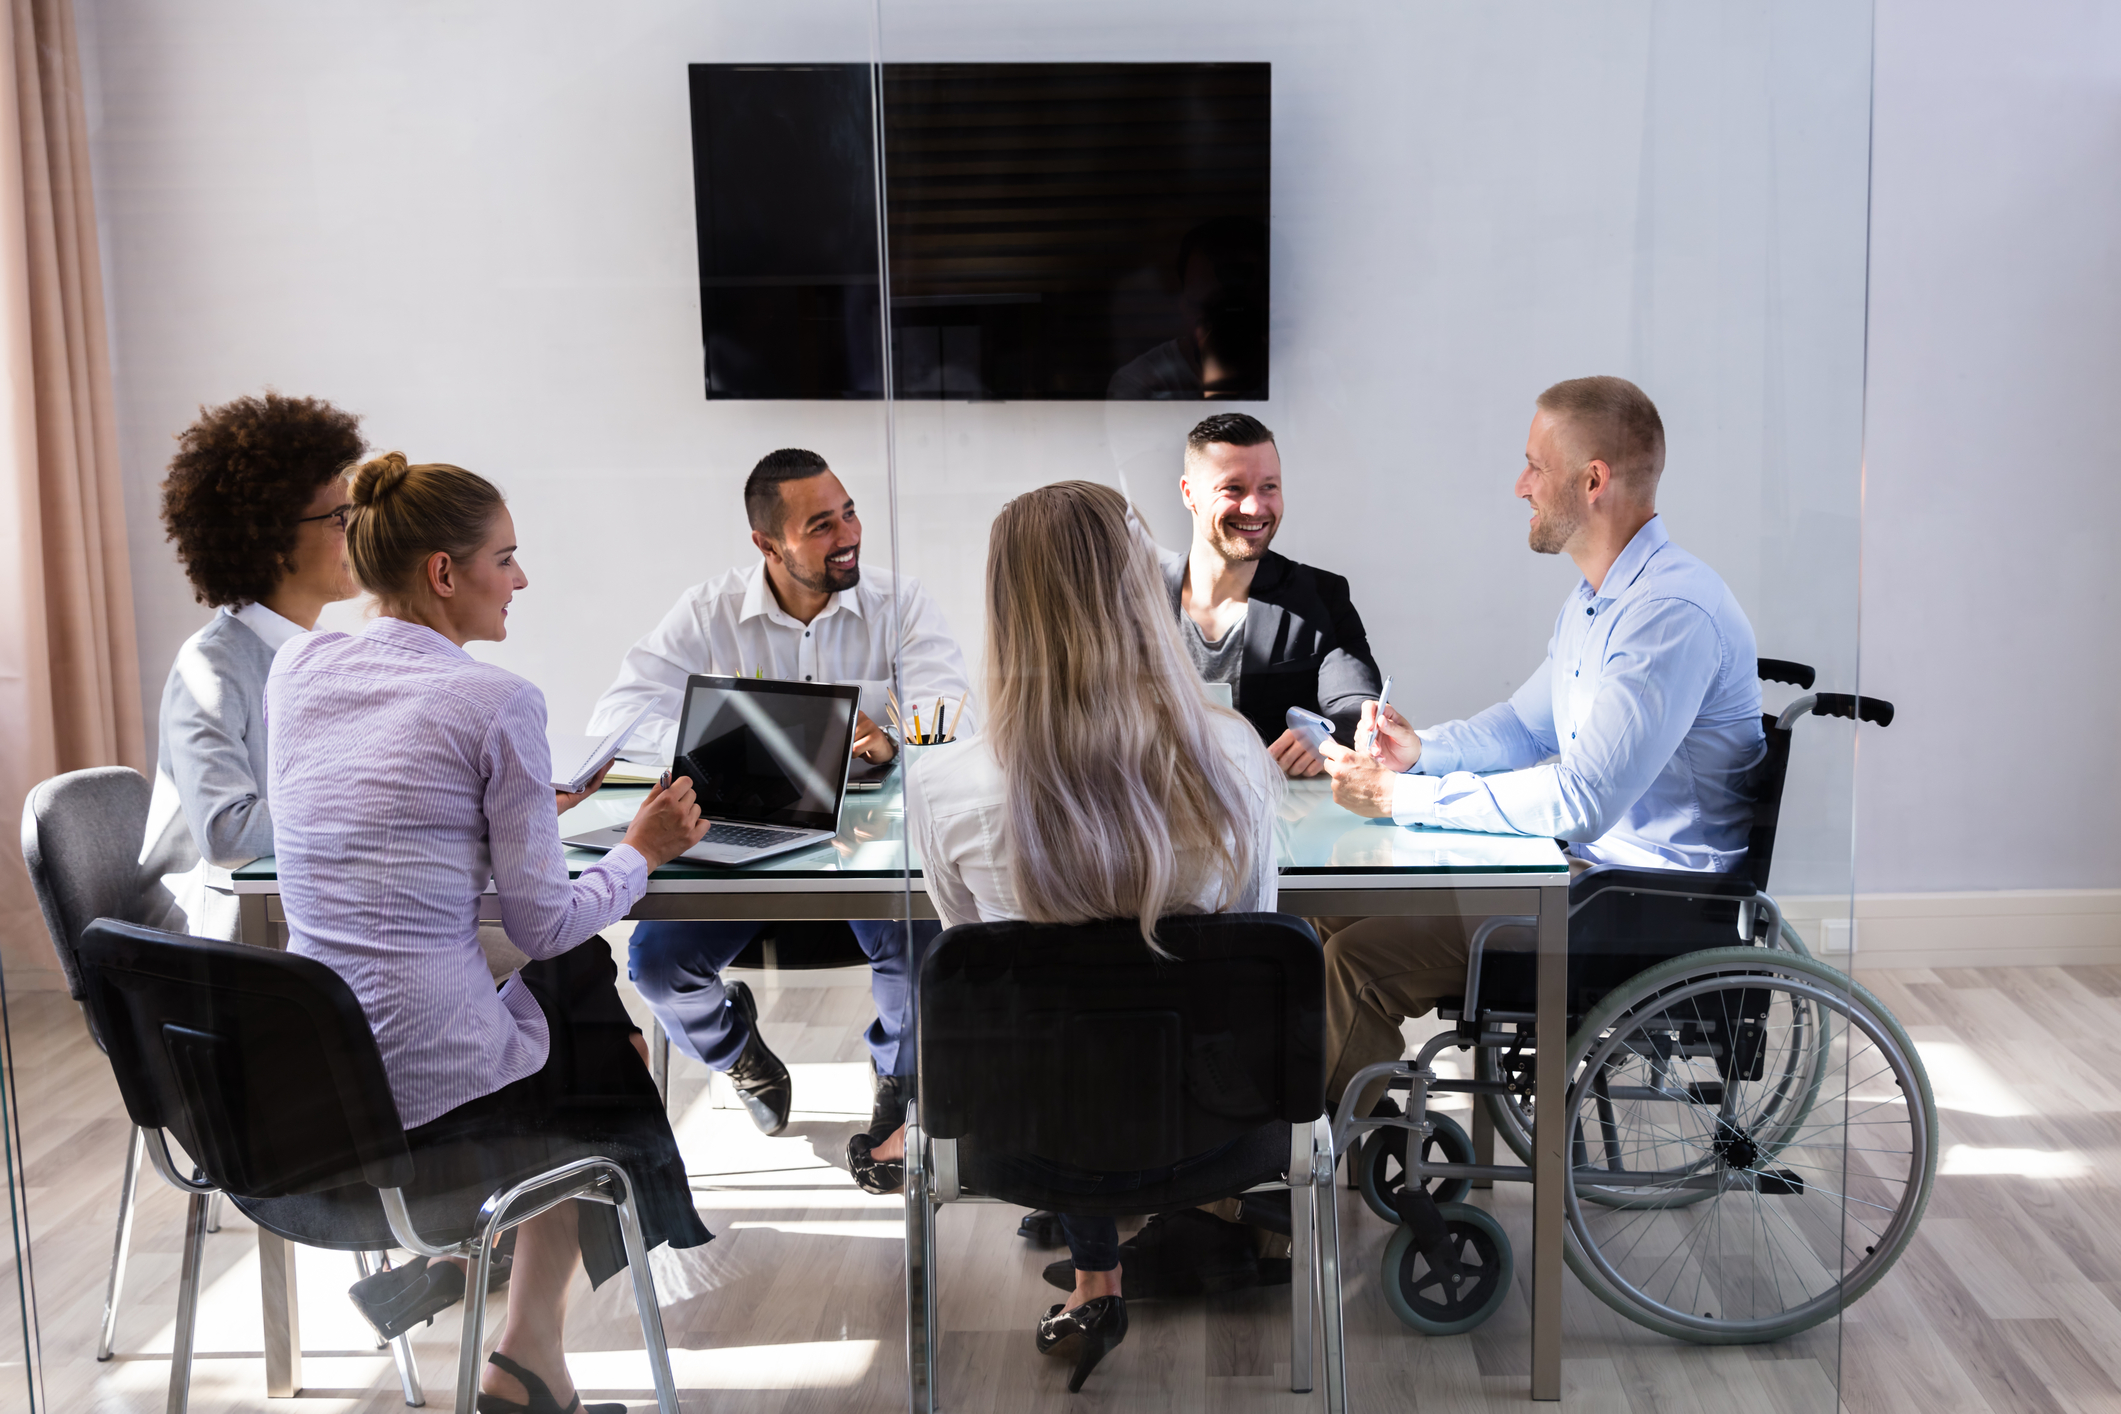 Team picture of a diversity of workers, headed by manager in a wheelchair. Photo 181429353 © Andrey Popov | Dreamstime.com